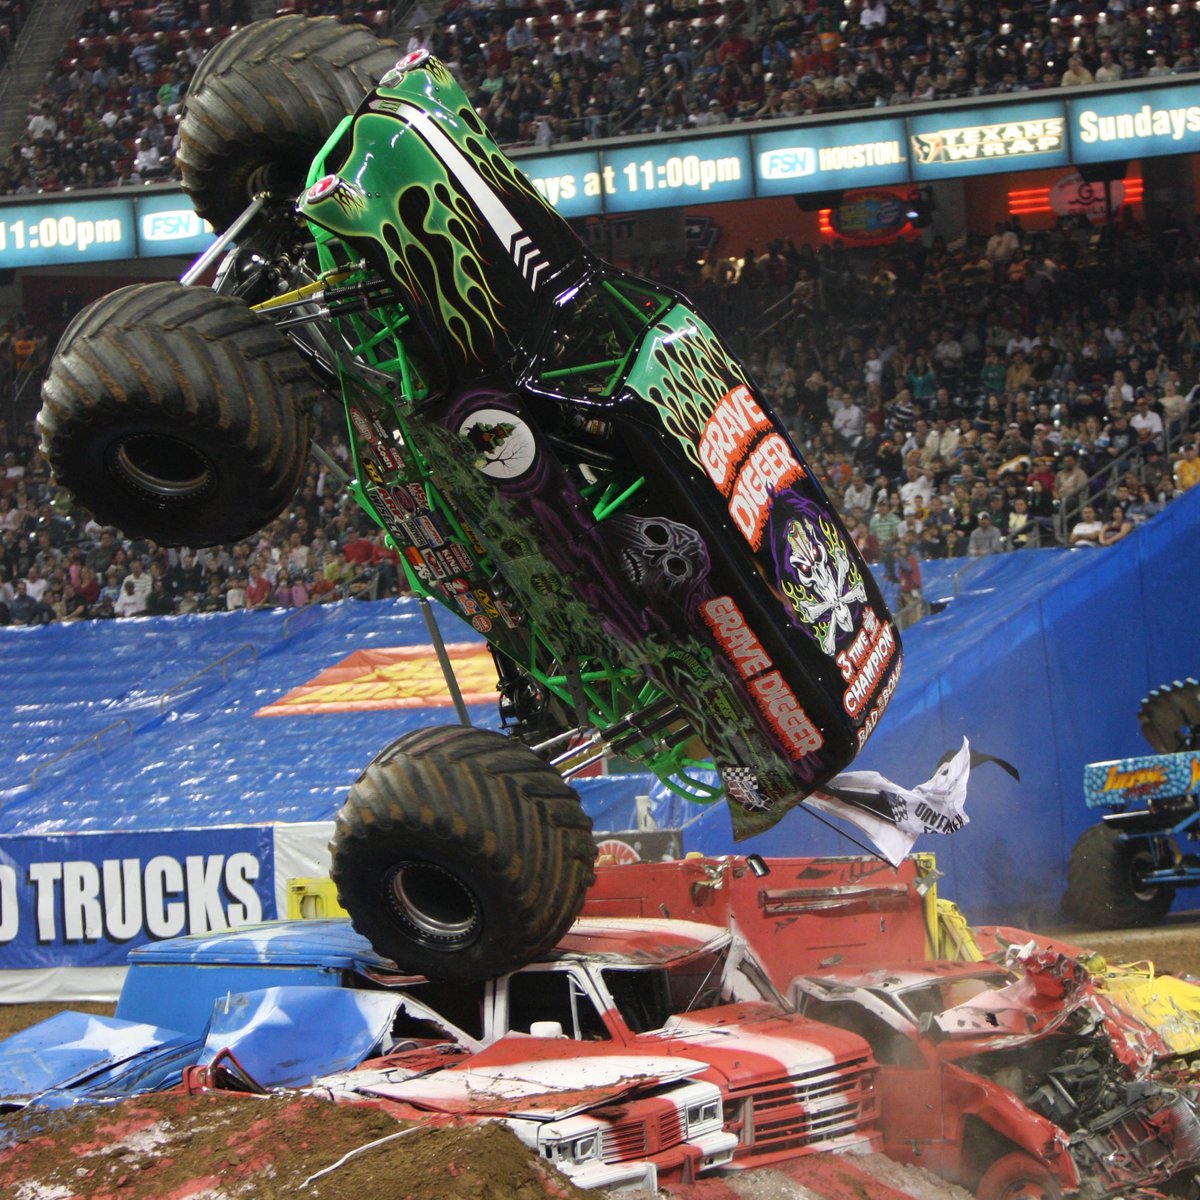 Monster Jam returns to Cleveland this weekend, bringing stunts and action